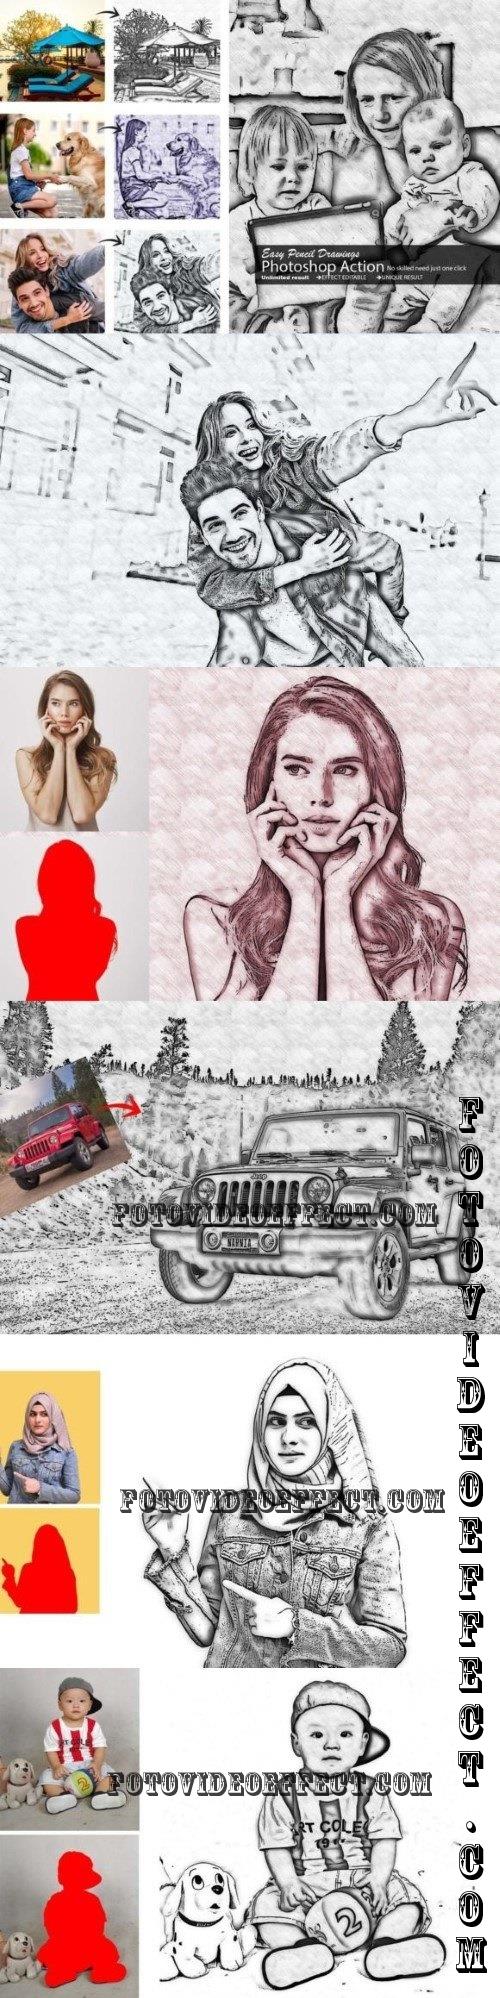 Easy Pencil Drawing Photoshop Action - 12750337